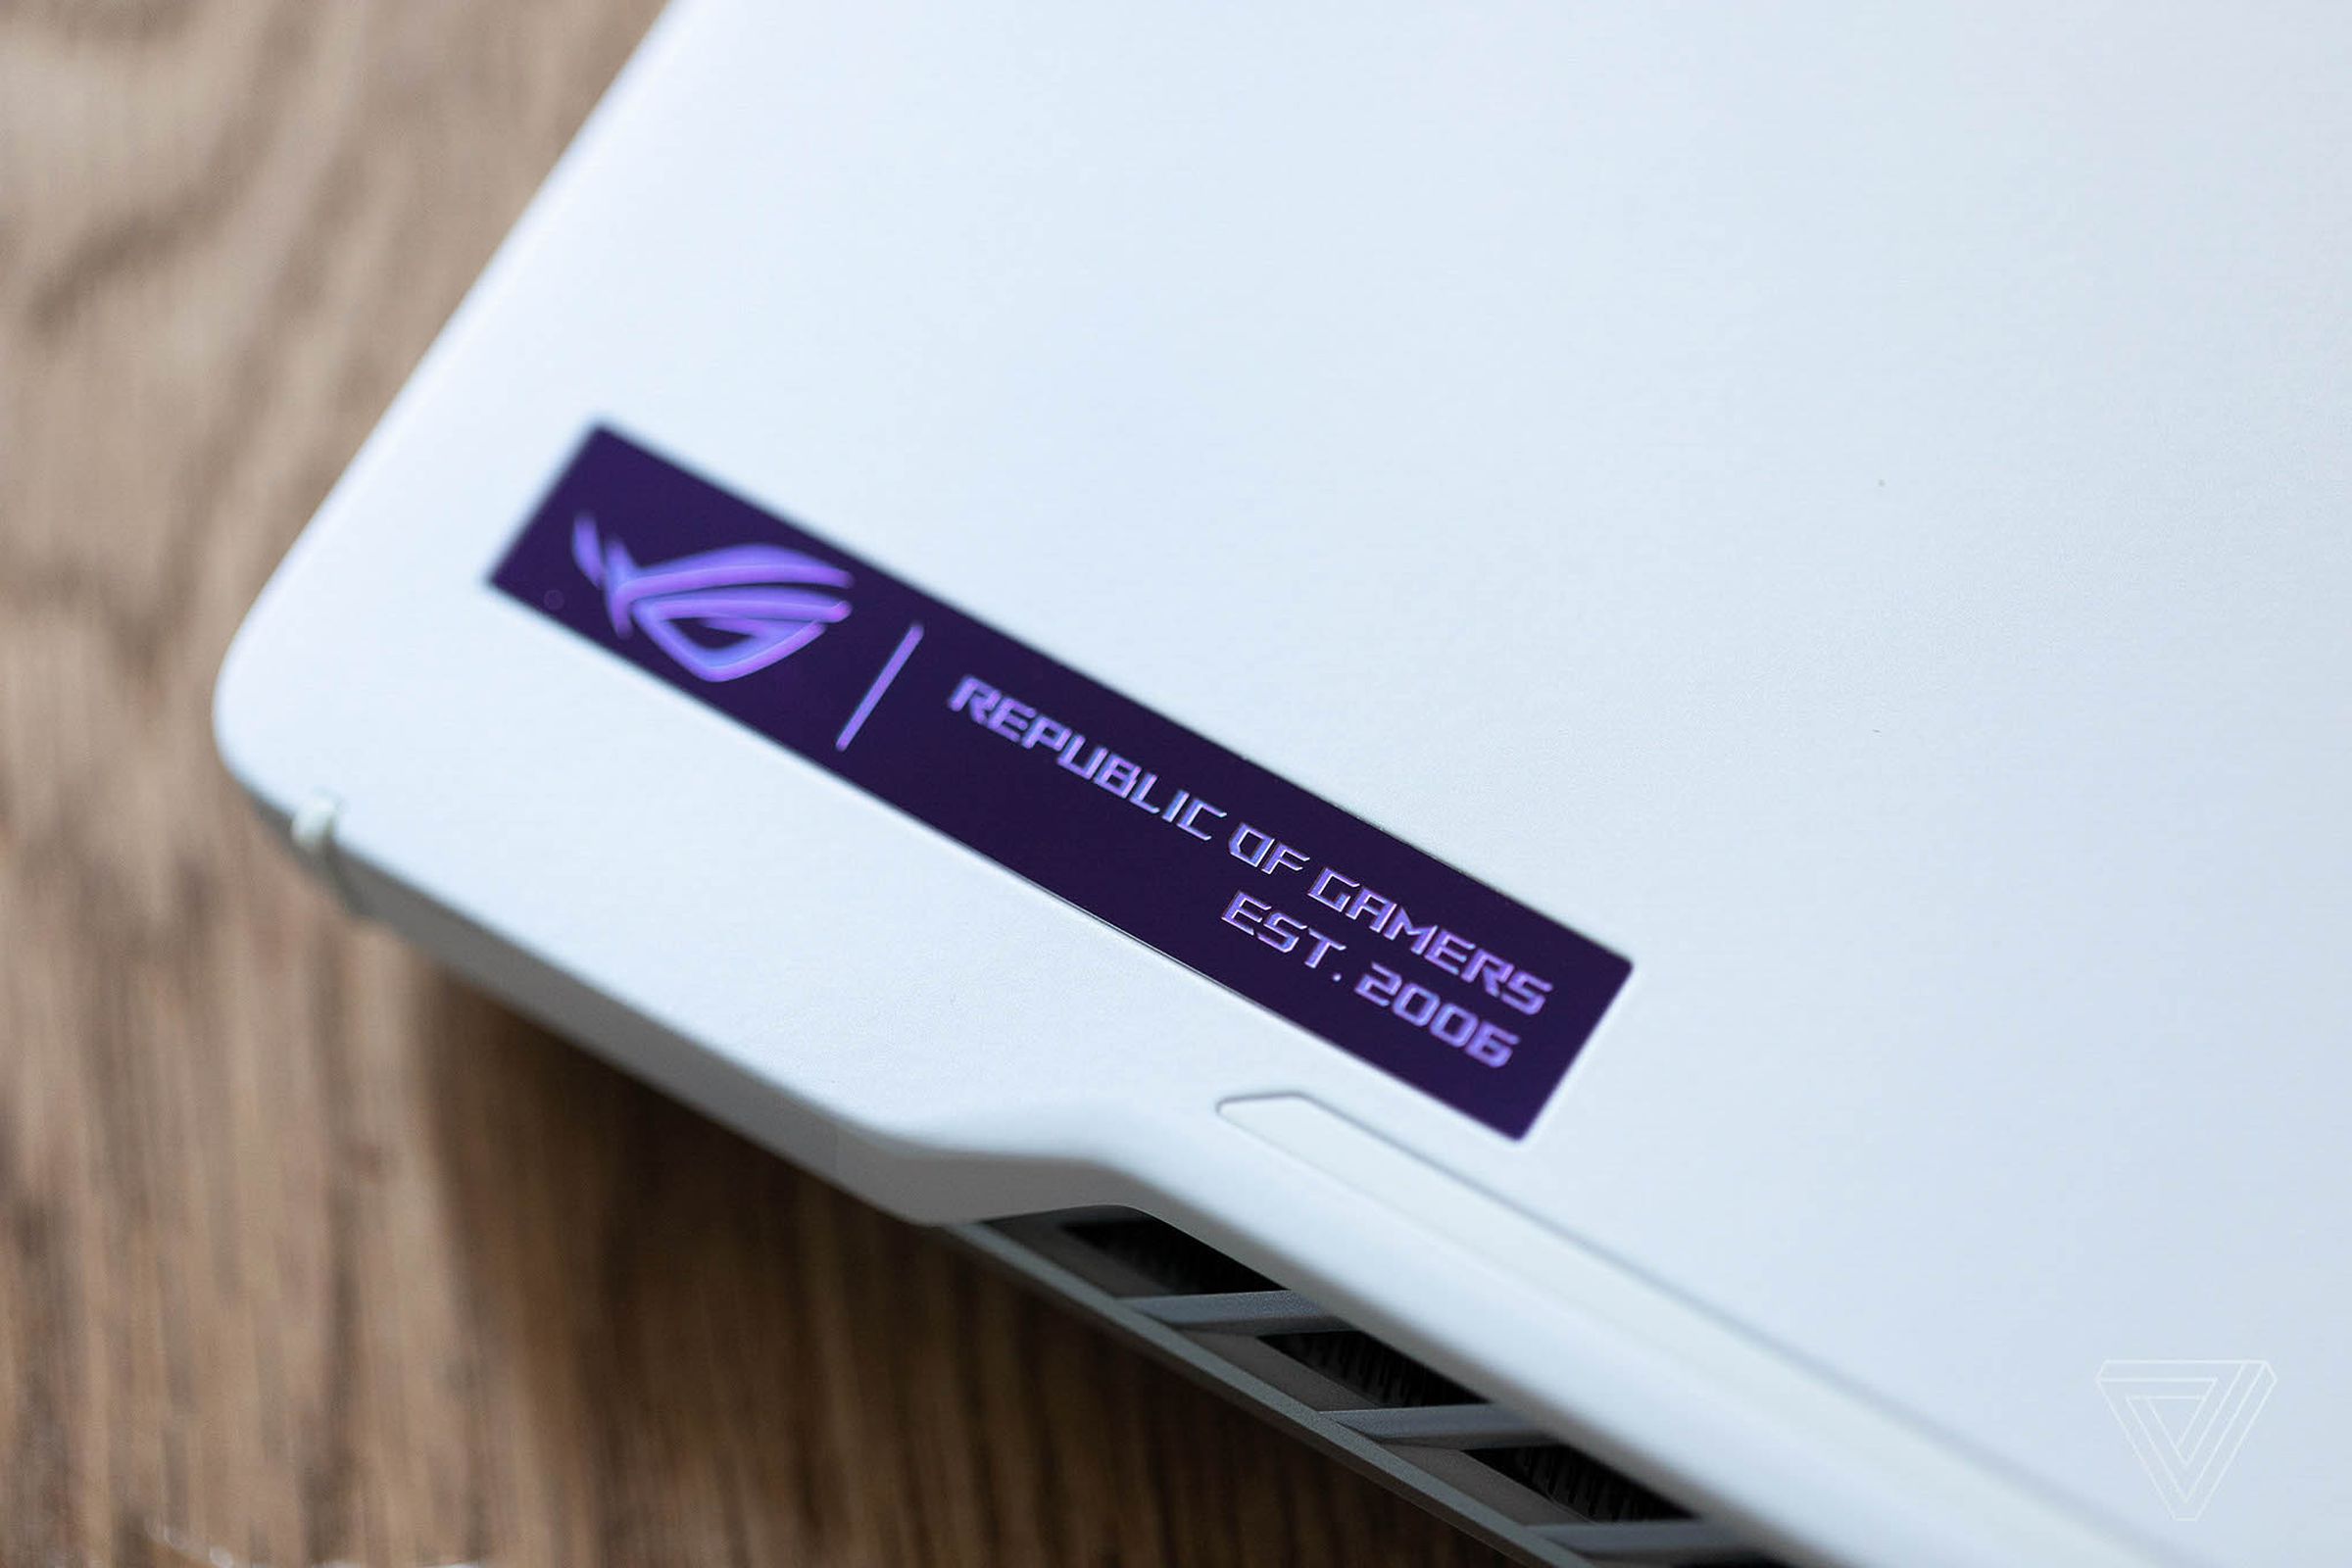 The Republic of Gamers nameplate on the lid of the Asus ROG Zephyrus G14.